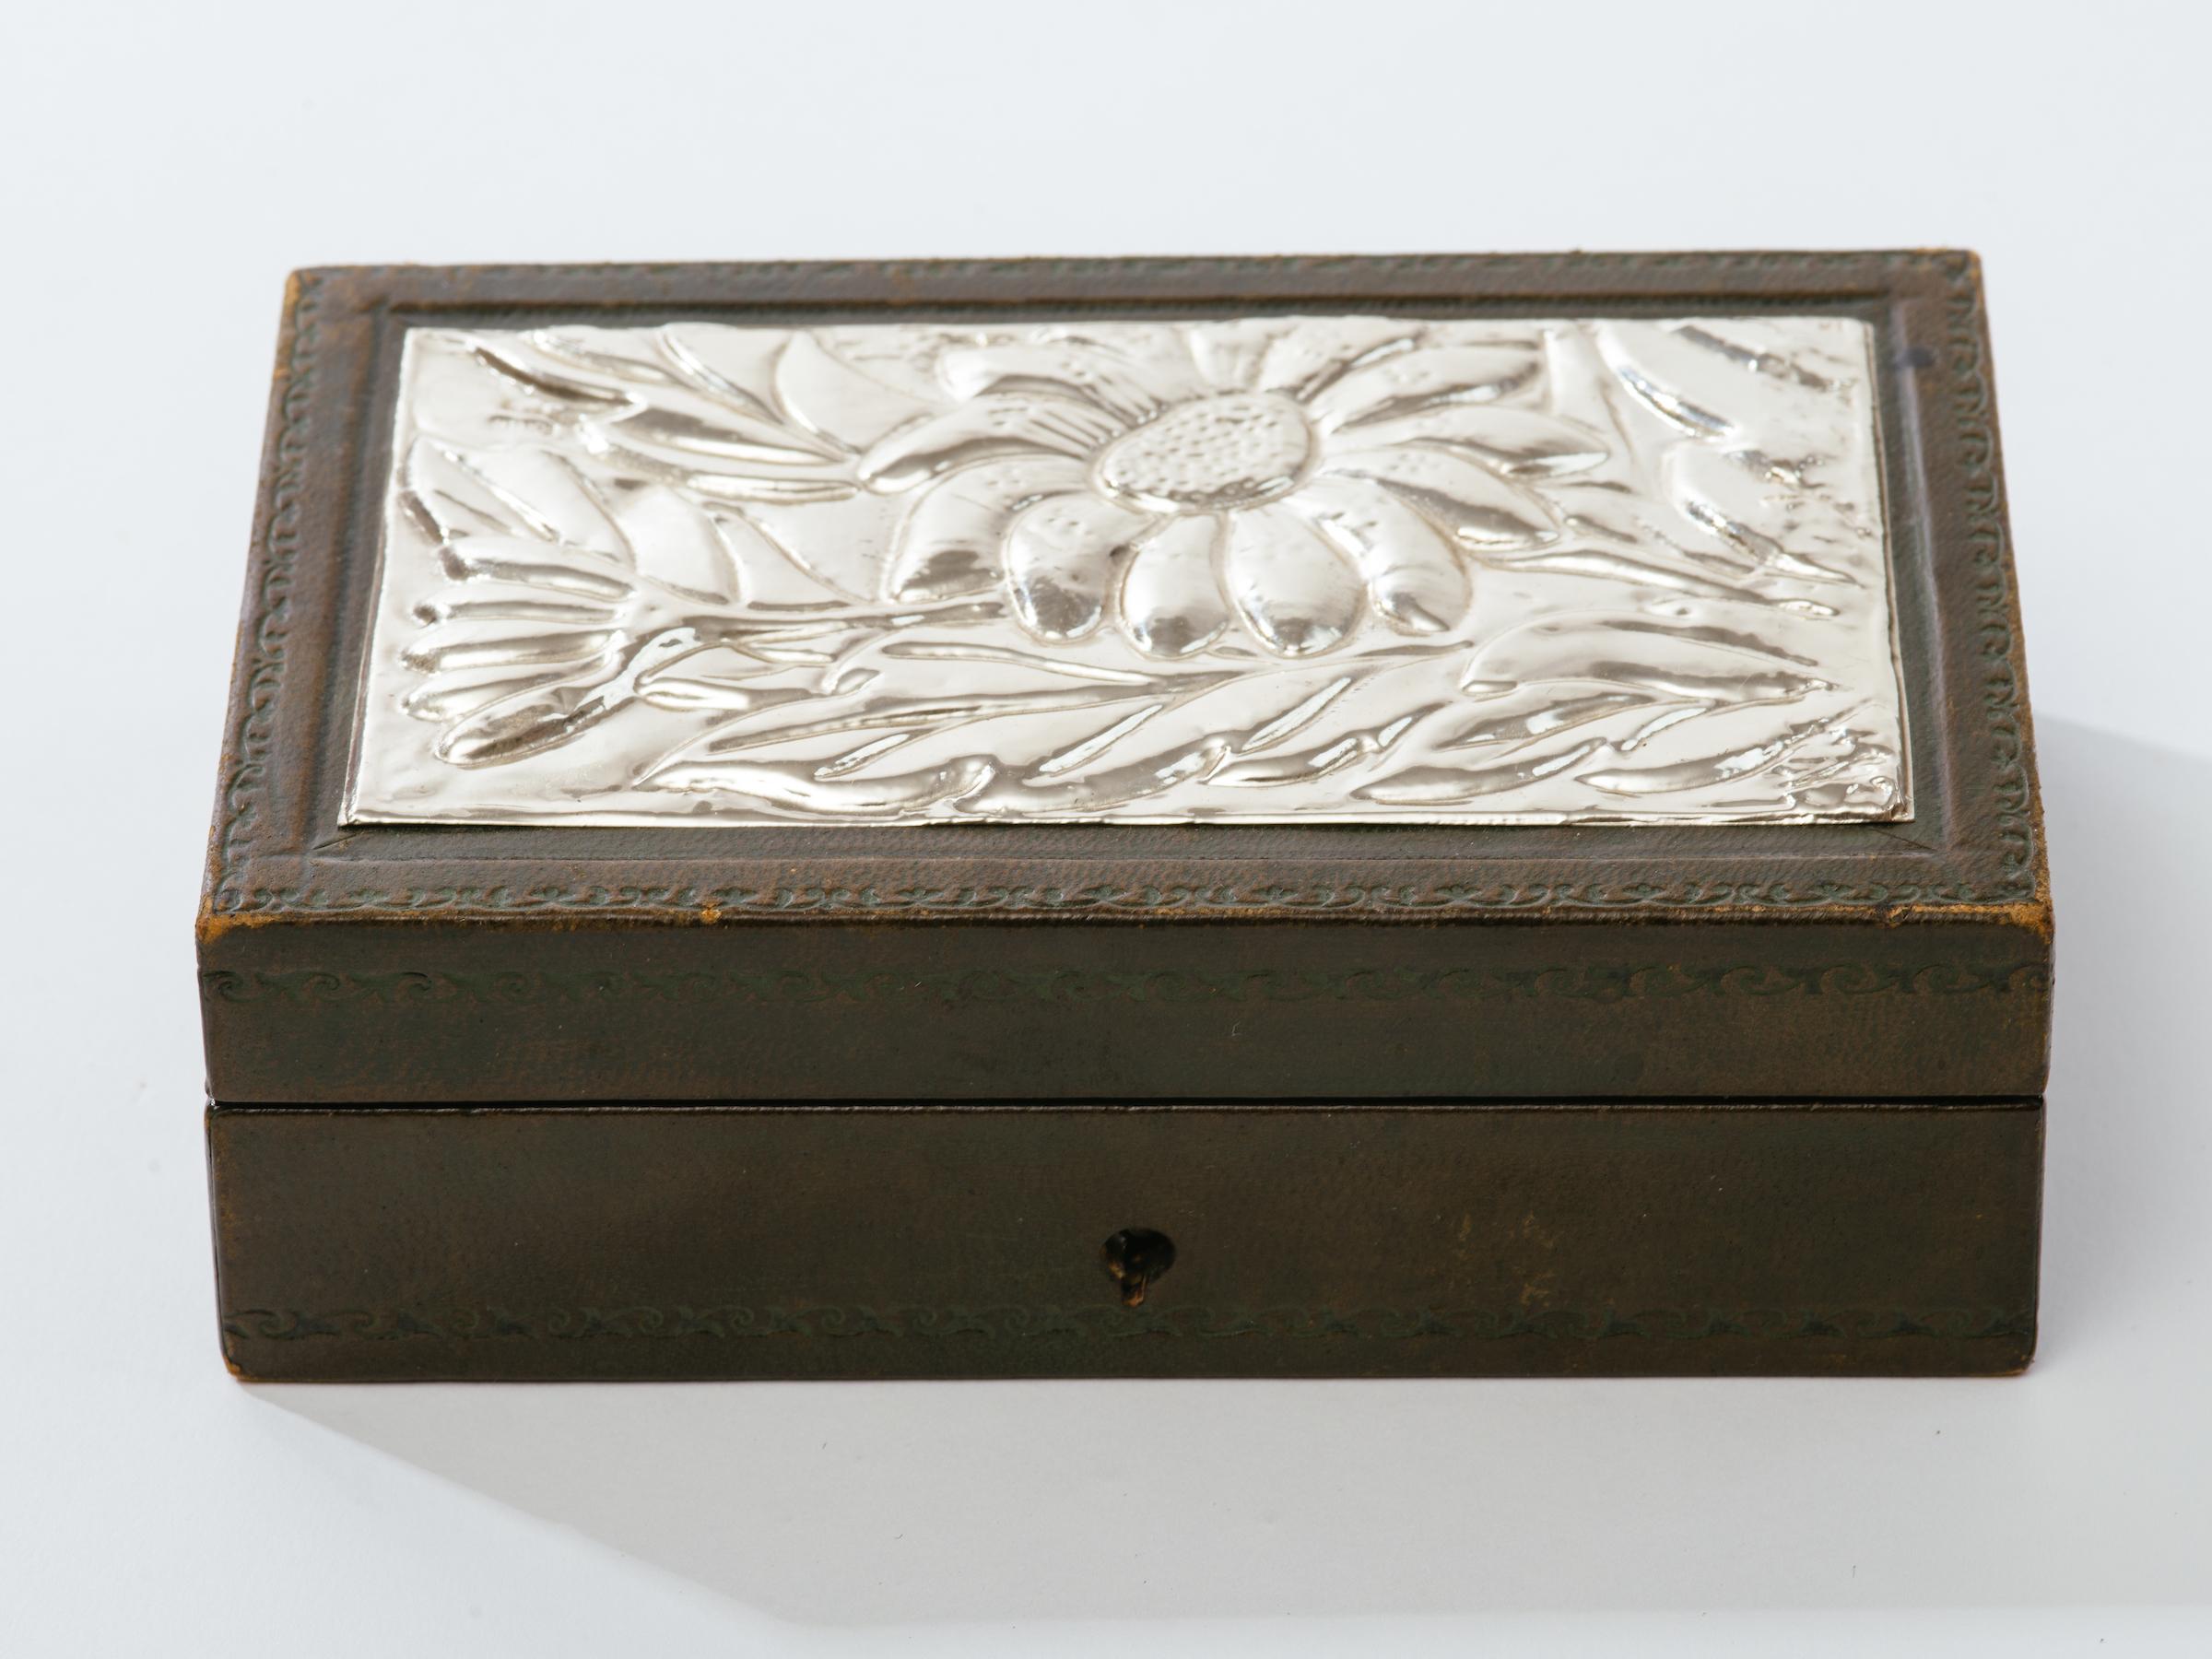 Italian tooled leather jewelry box with hand-wrought sliver repousse top. Hallmarked 920  on corner of silver top. Missing key, Italy, circa 1950s.